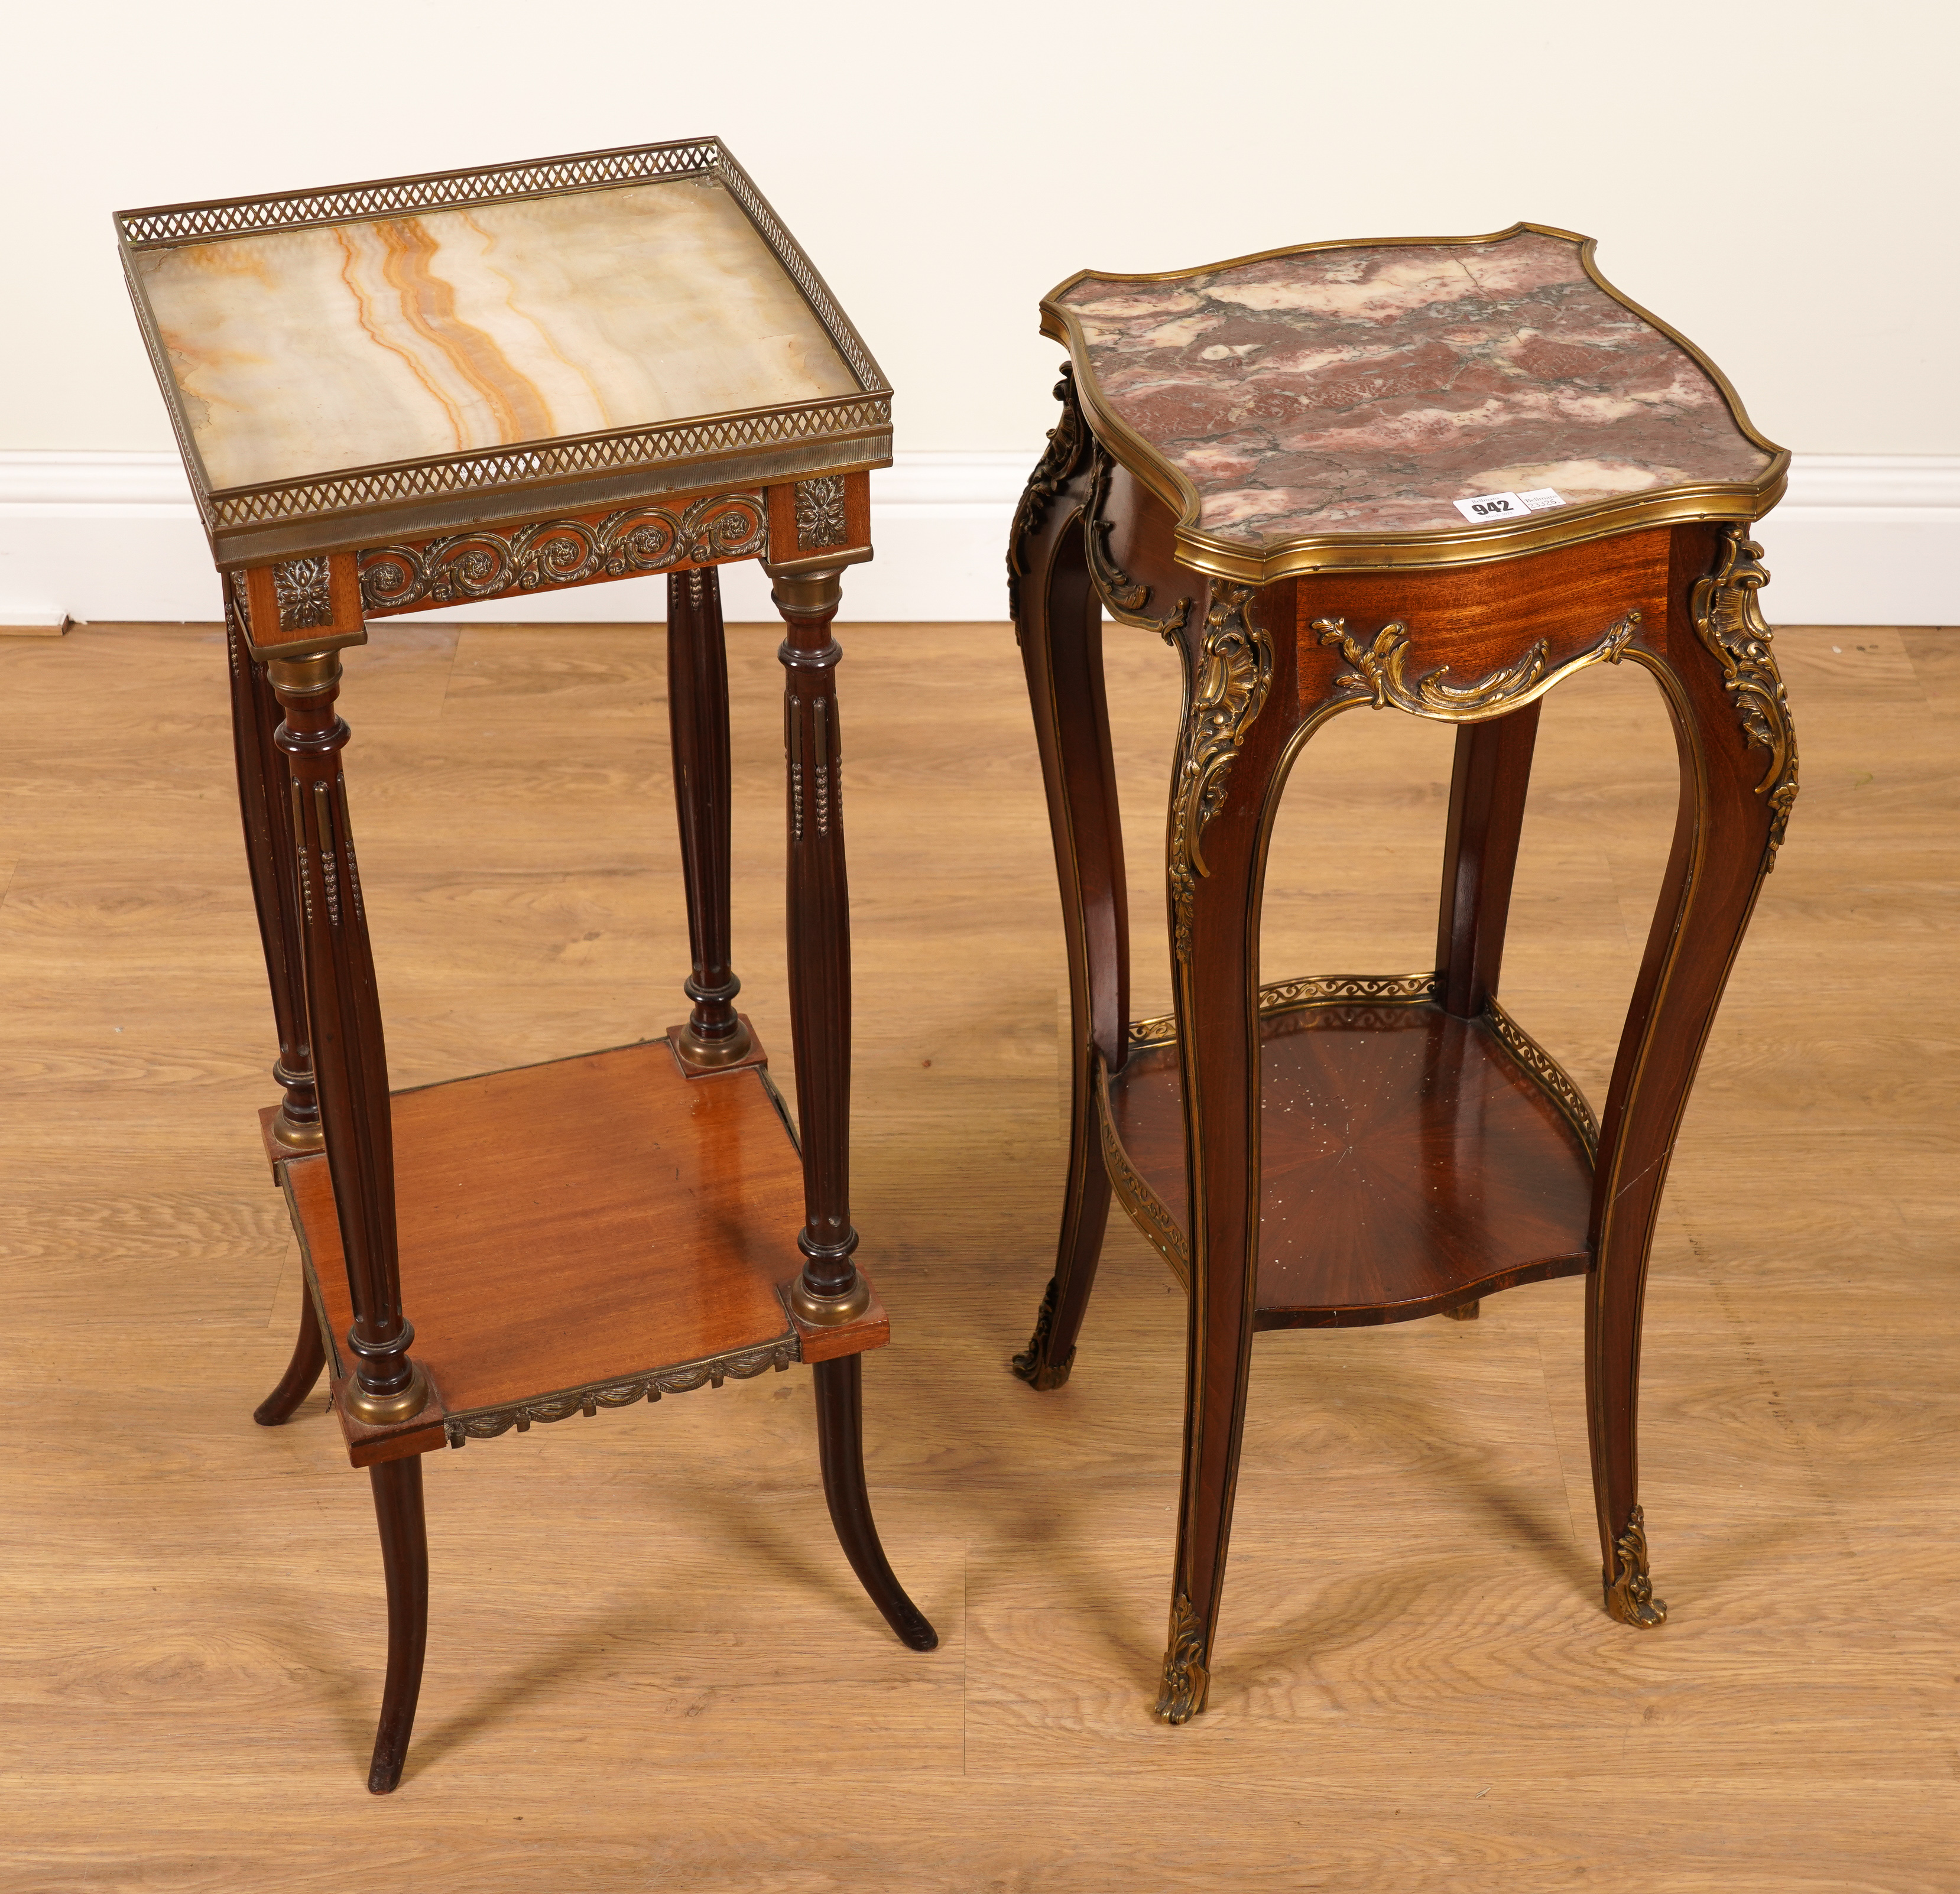 A LATE 19TH CENTURY FRENCH GILT-METAL MOUNTED MARBLE TOPPED TWO TIER OCCASIONAL TABLE (2) - Image 2 of 3